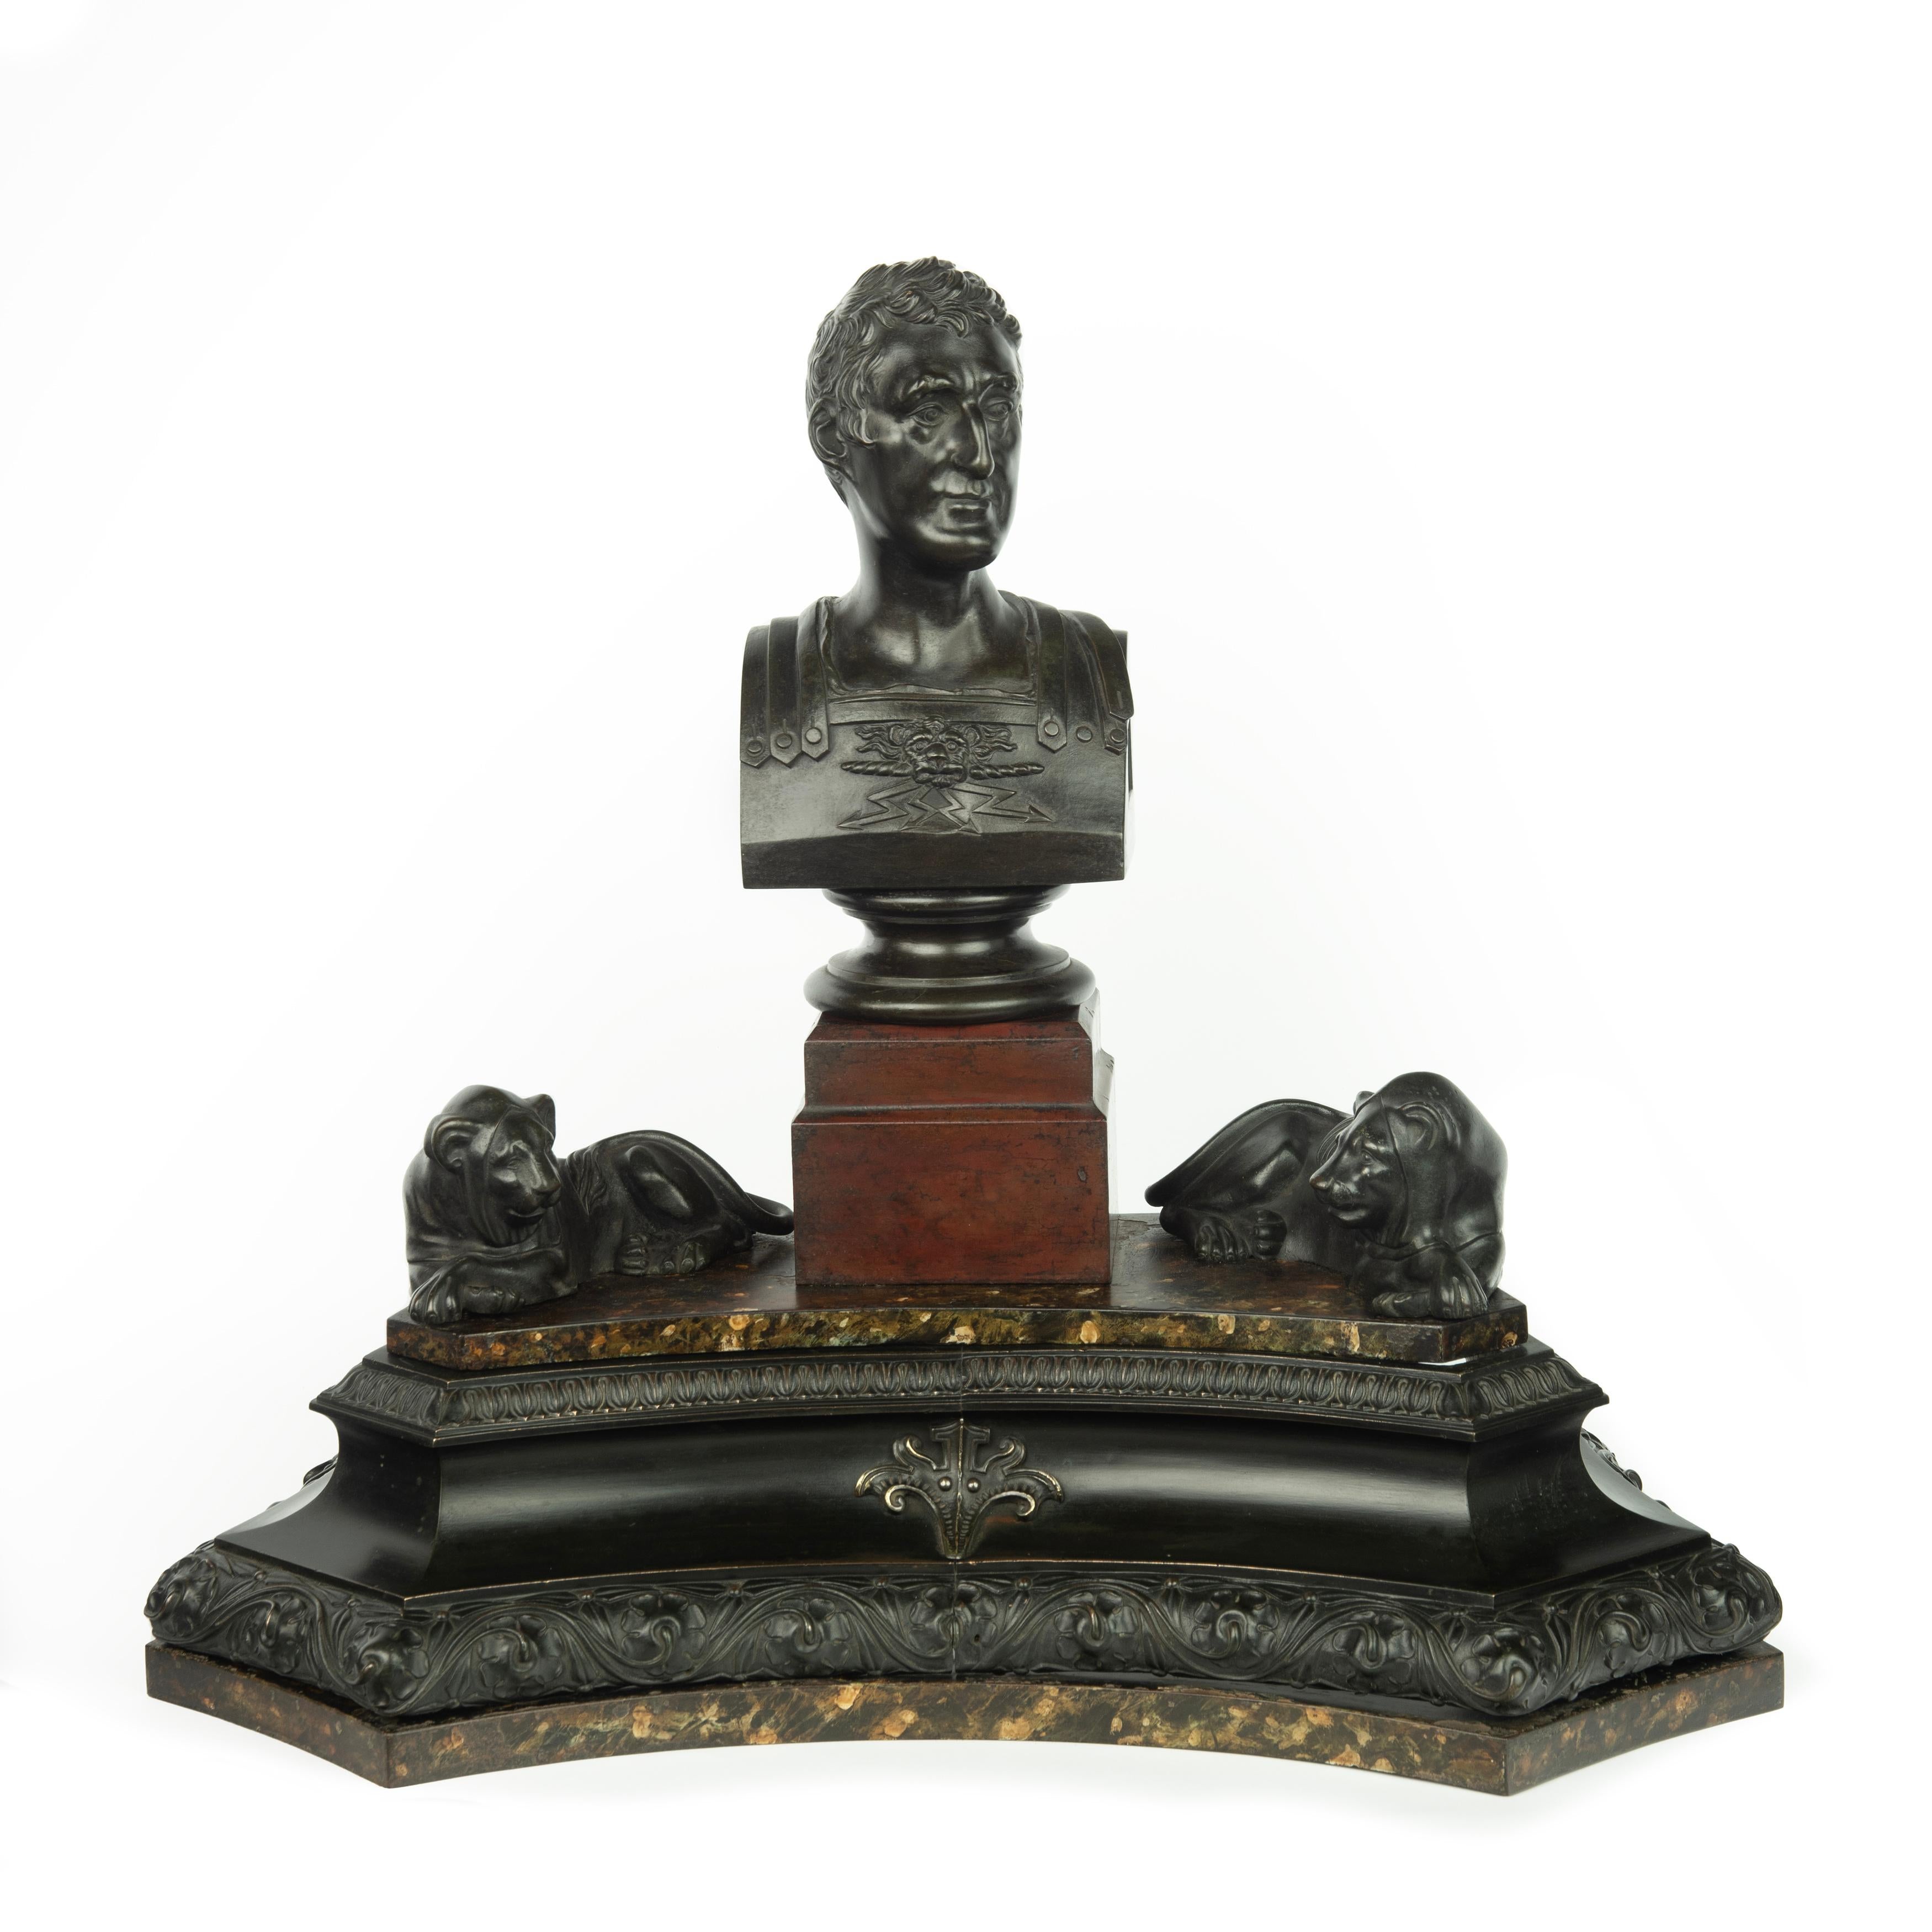 This impressive bronze table bust of the Duke of Wellington is in the form of a classical tribute.  He is portrayed wearing Roman leather armour, the breastplate with a central lion’s mask radiating lightning bolts.  This is set on a turned socle